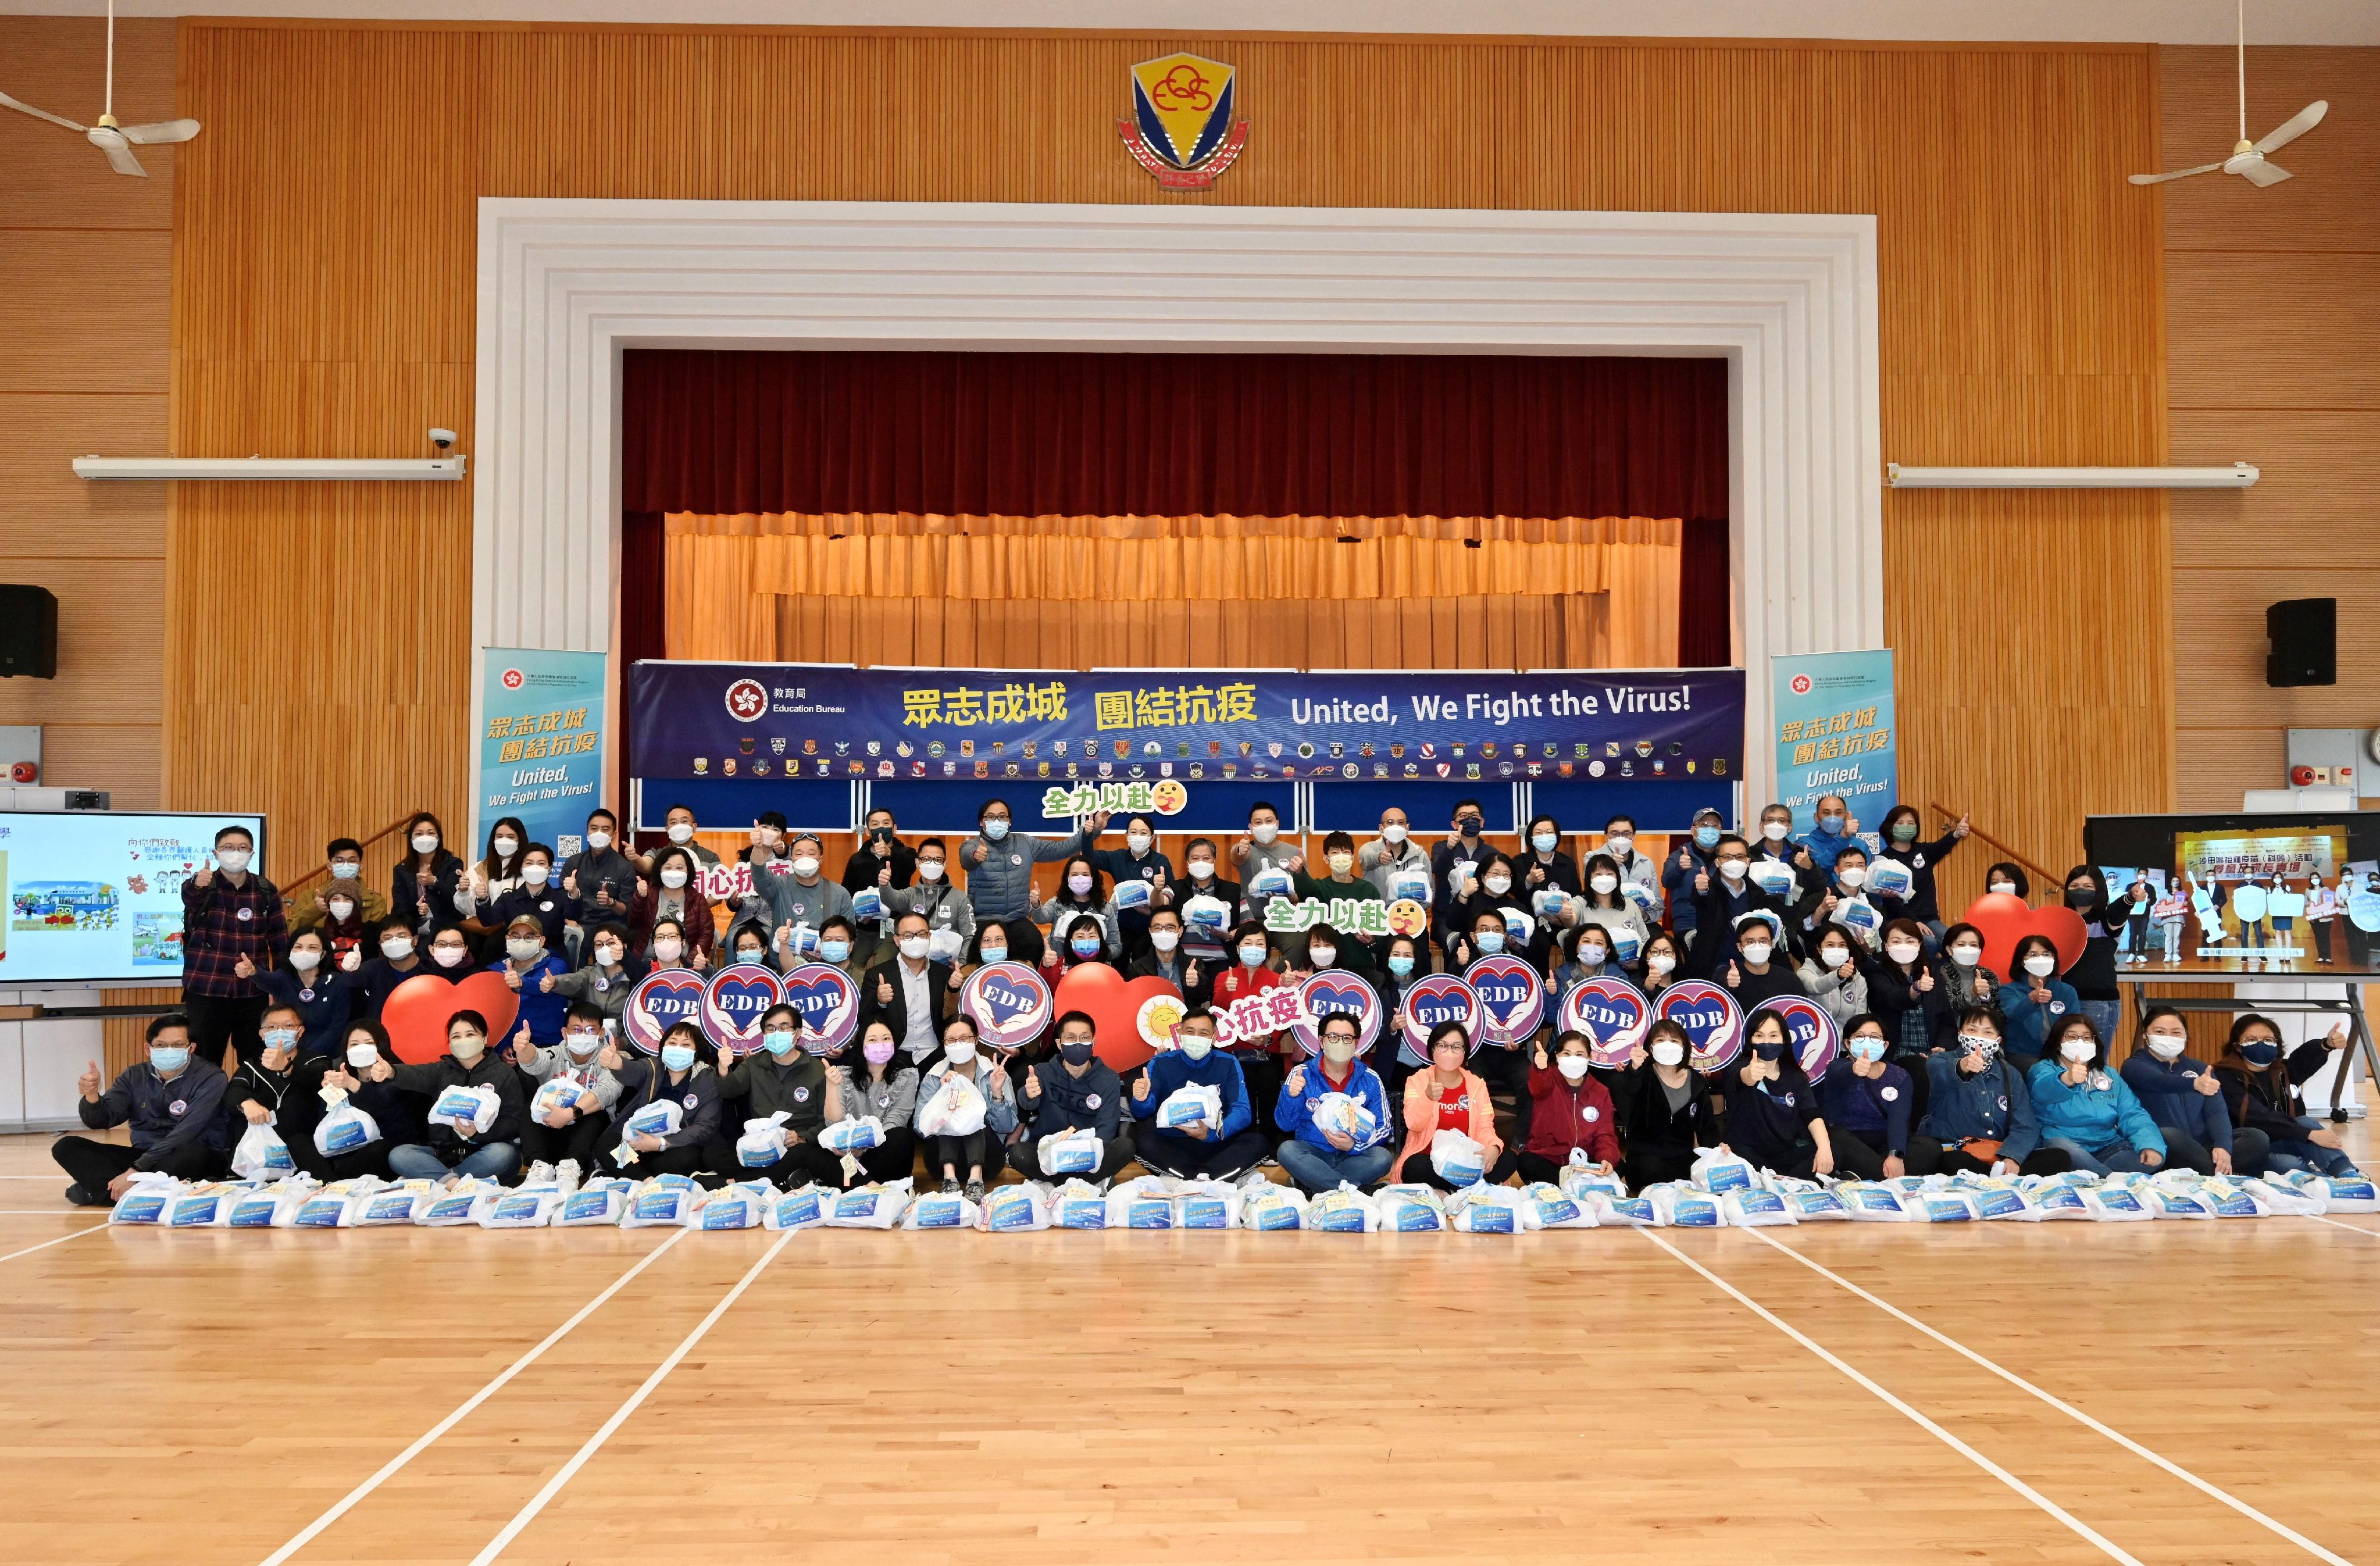 The Government today (April 2) started distributing anti-epidemic service bags to all households in Hong Kong with a view to enhancing the public's anti-epidemic awareness and capability. The Education Bureau (EDB) has been actively participating in the distribution work. Photo shows the Secretary for Education, Mr Kevin Yeung (twelfth left, second row); the Permanent Secretary for Education, Ms Michelle Li (eleventh left, second row); and the Under Secretary for Education, Dr Choi Yuk-lin (thirteenth left, second row), in a group photo with the volunteer teams comprising staff members of the EDB, school heads and teachers of government schools.
